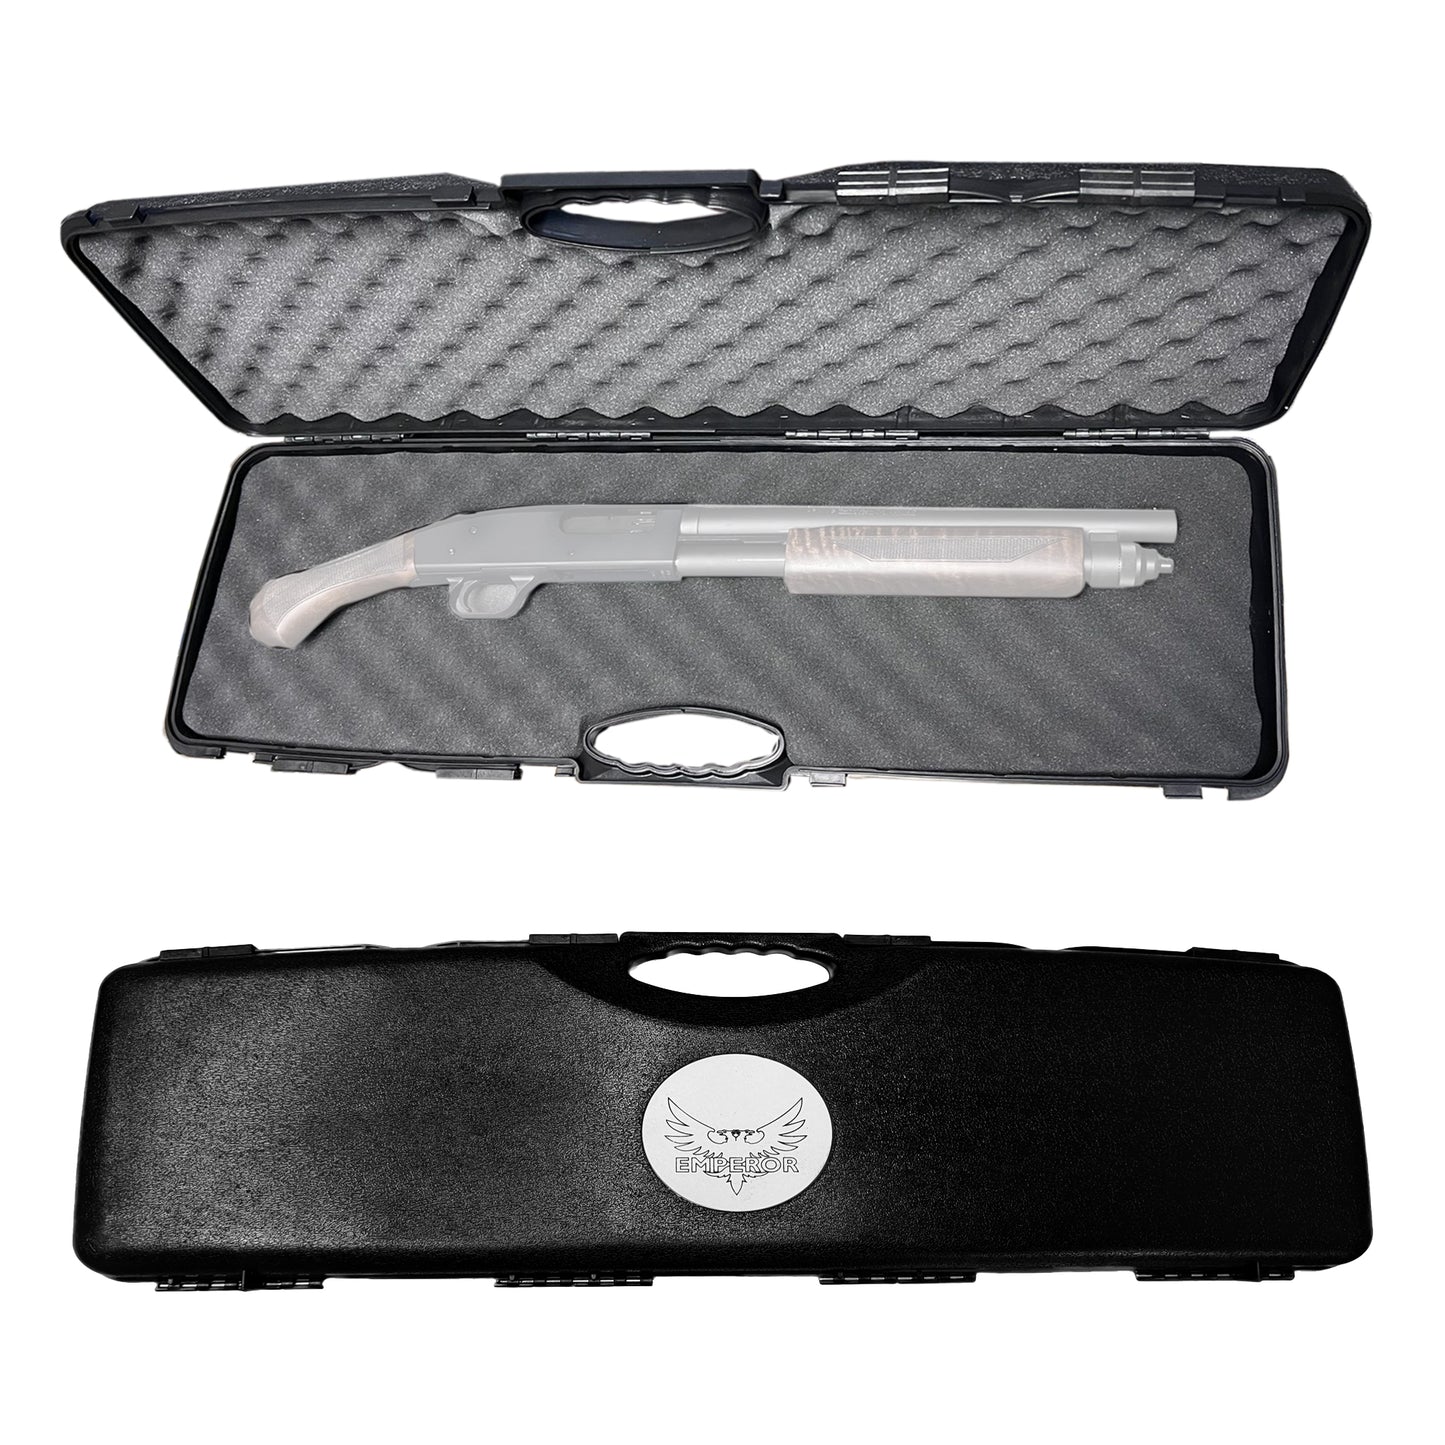 Emperor Single Scope Hard Plastic Rifle Case with Foam | 31.25" x 10" x 3" Scratch and Water Resistant Storage Case - Dual Layers of Soft Egg Crate Foam